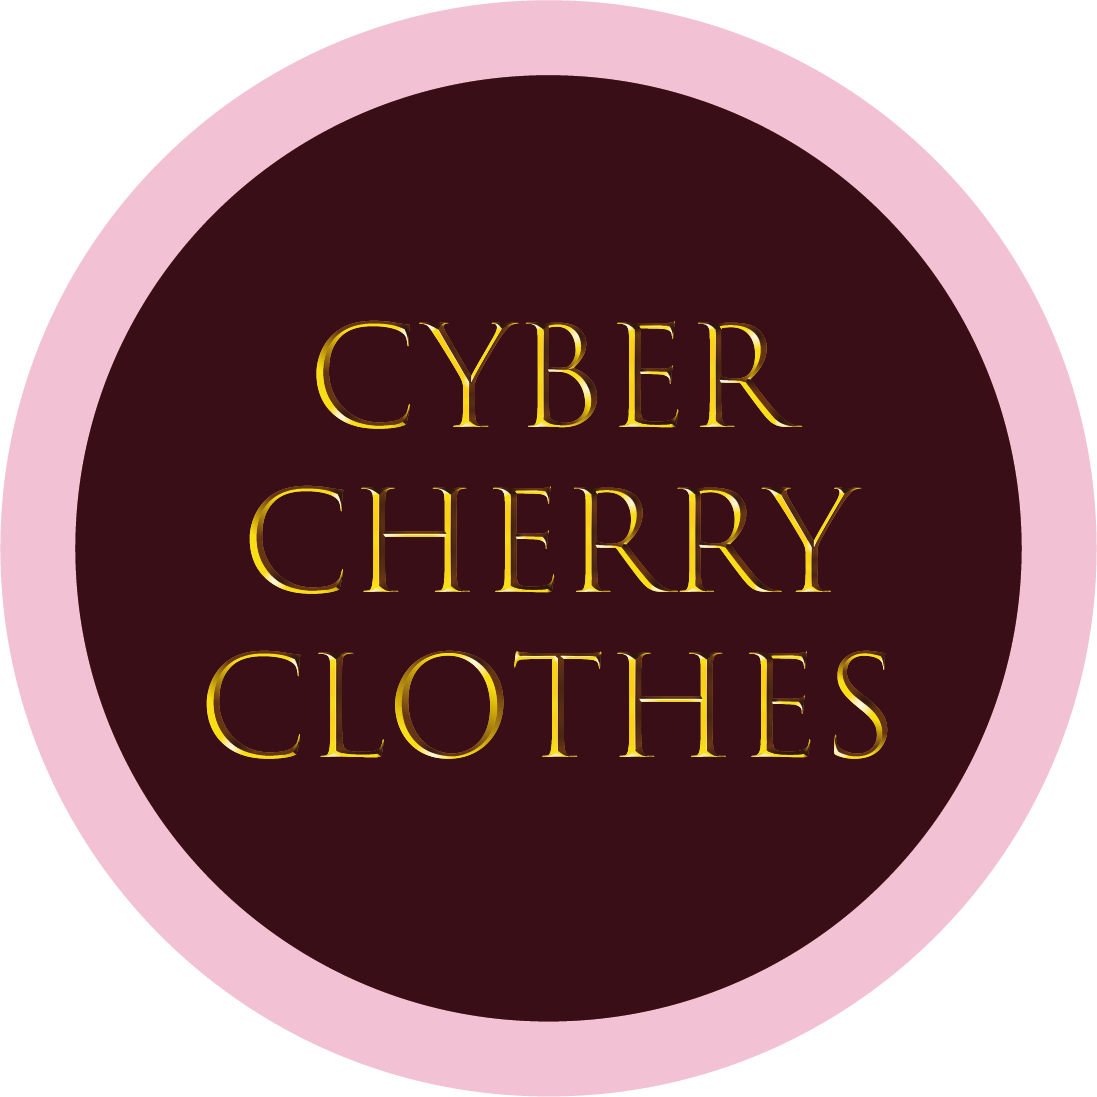 Cyber Cherry Clothes